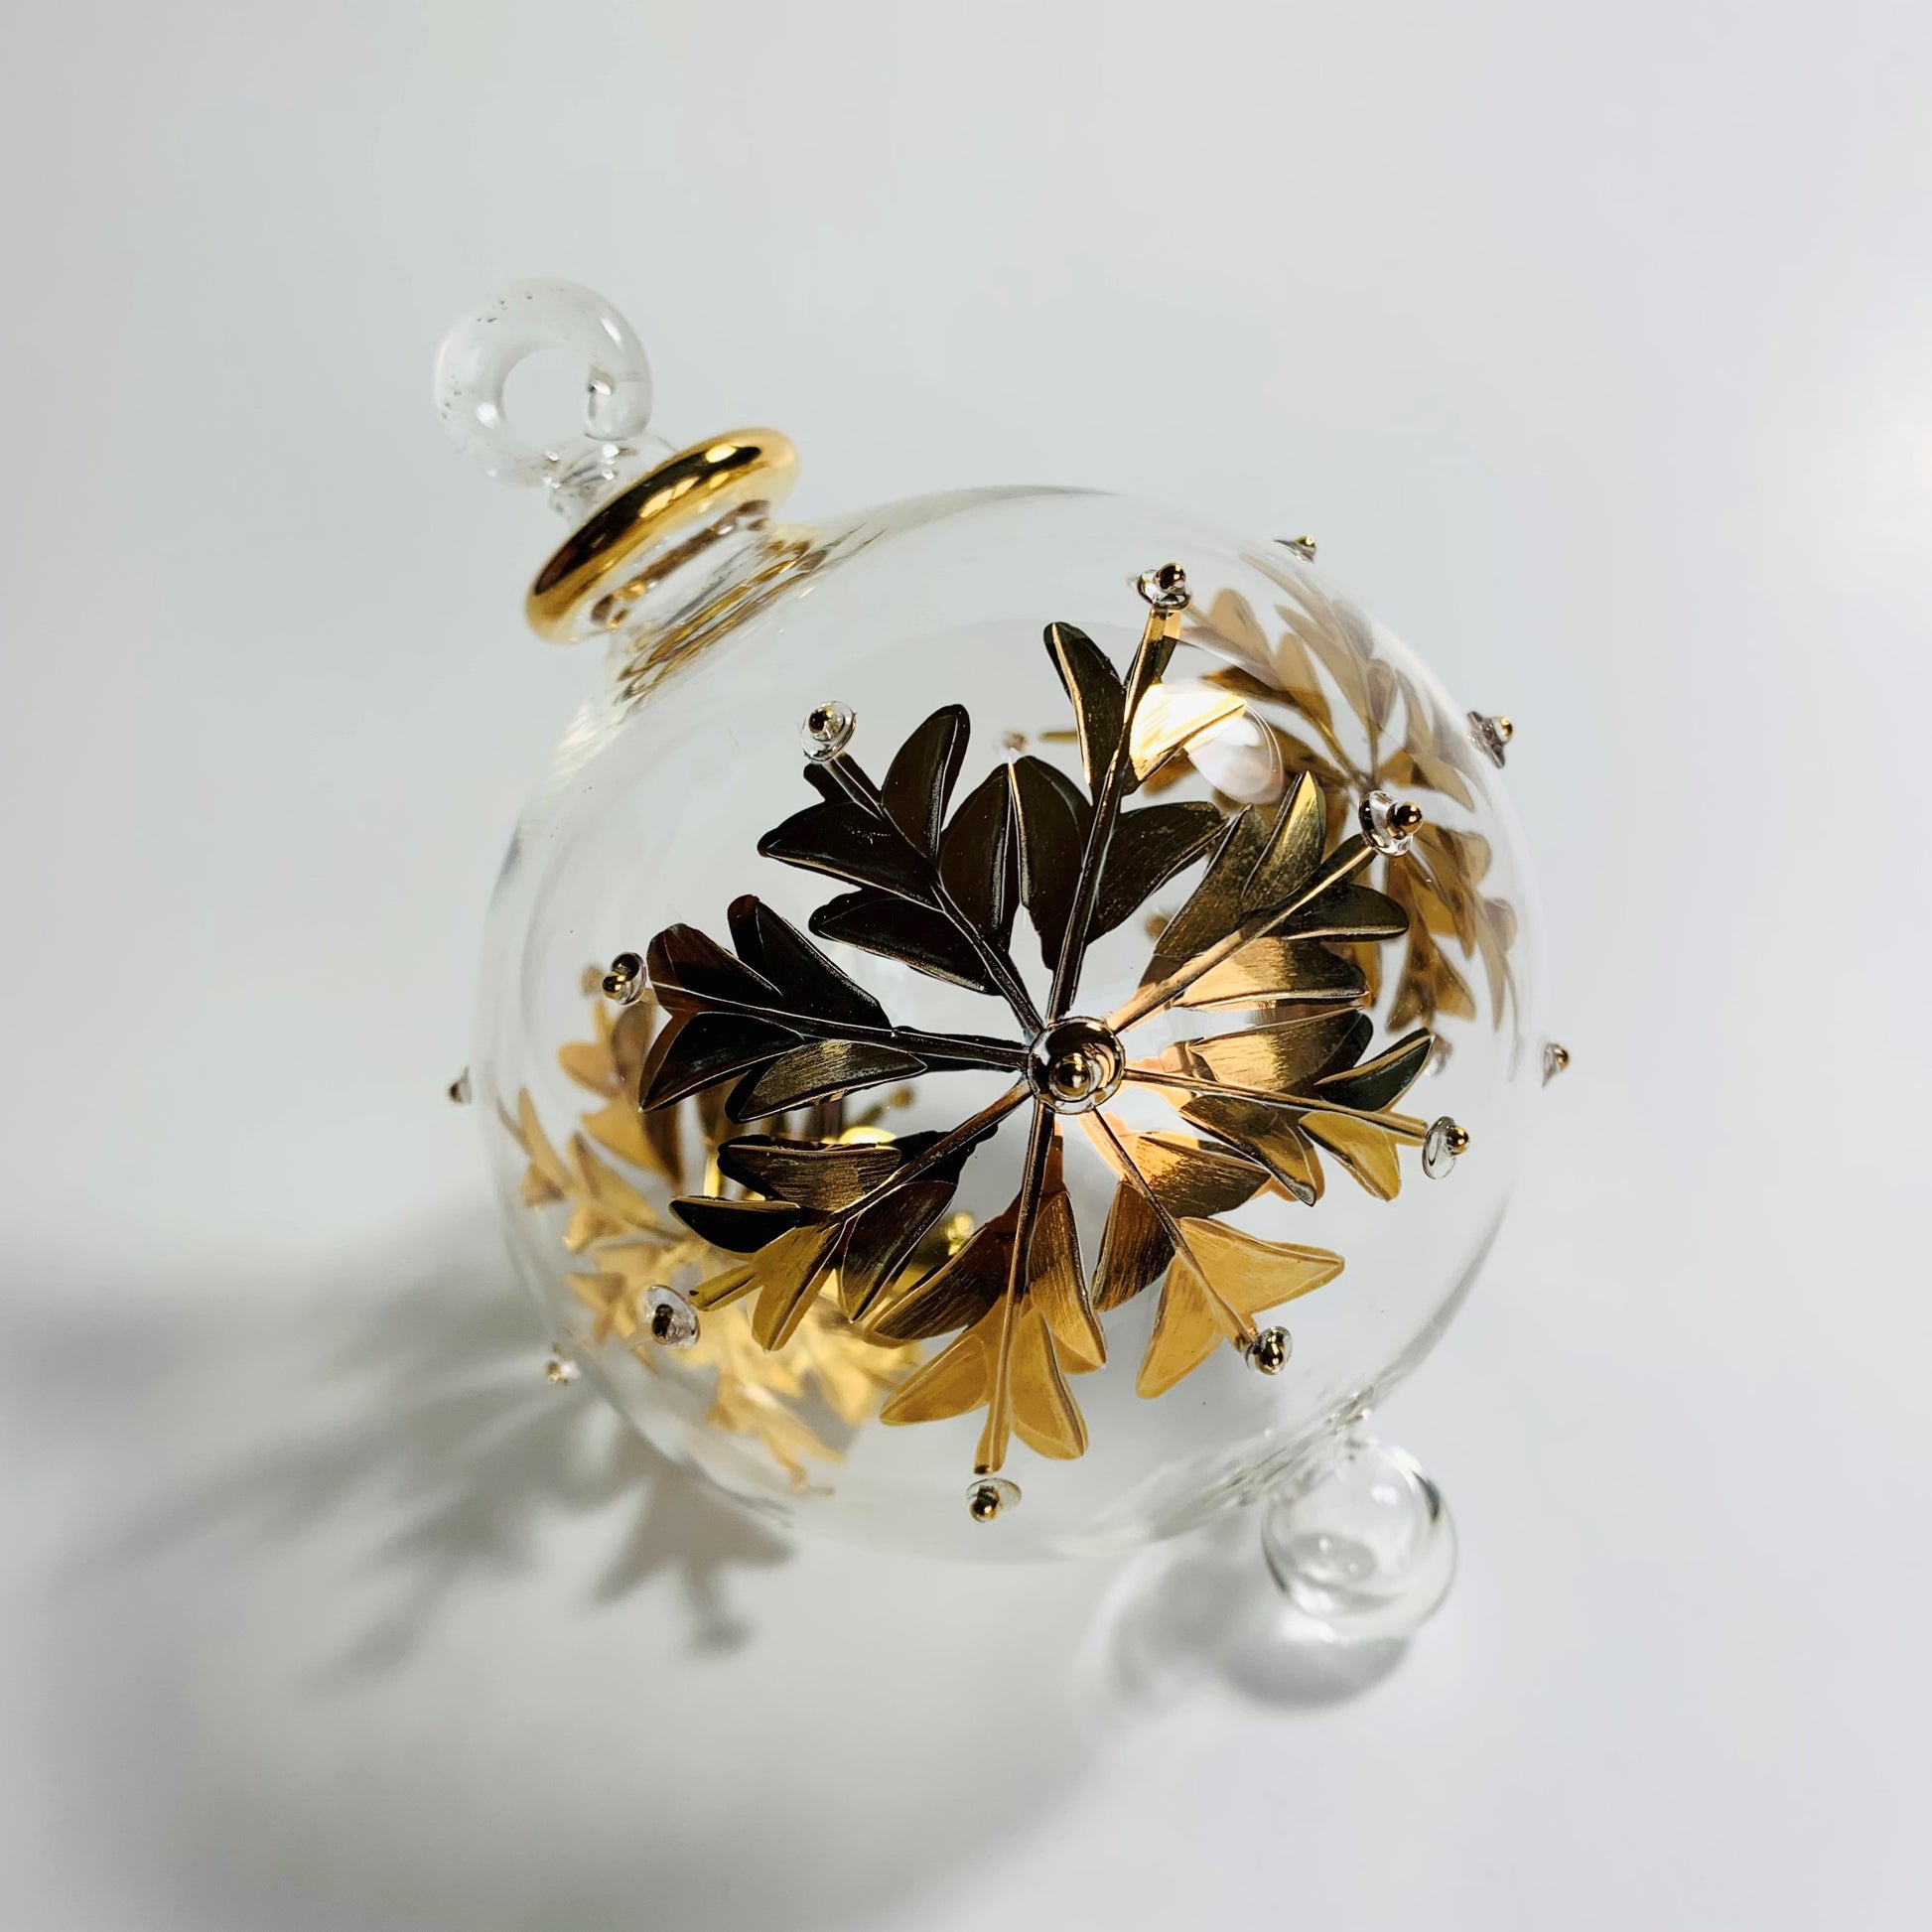 Ethically Sourced Blown Glass Ornament - Gold Snow Flake